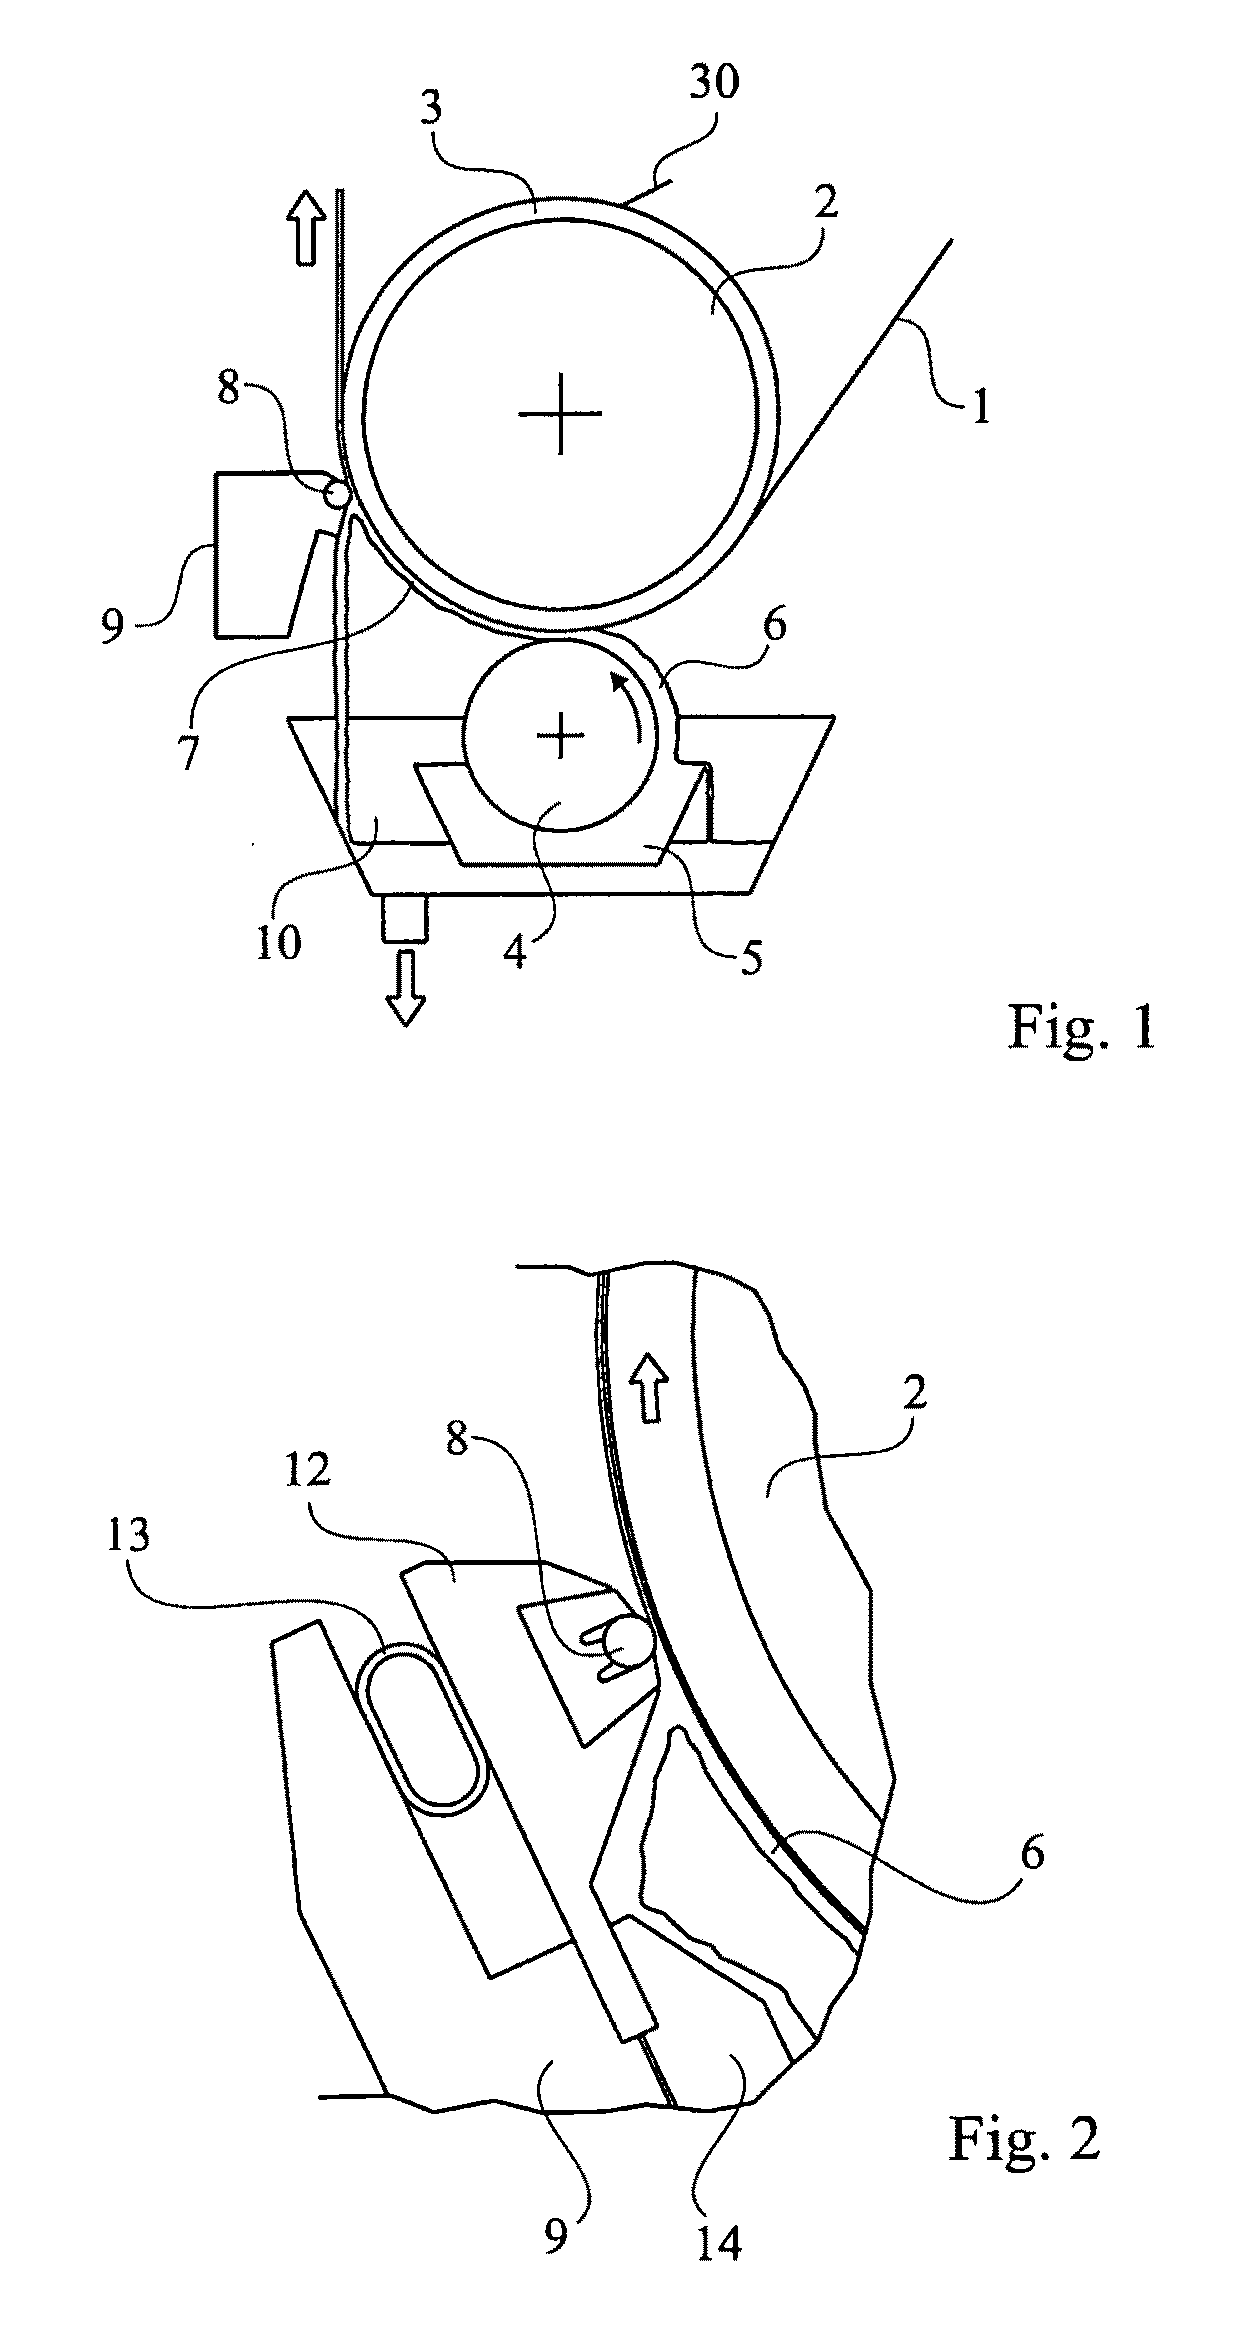 Device and Method for Coating